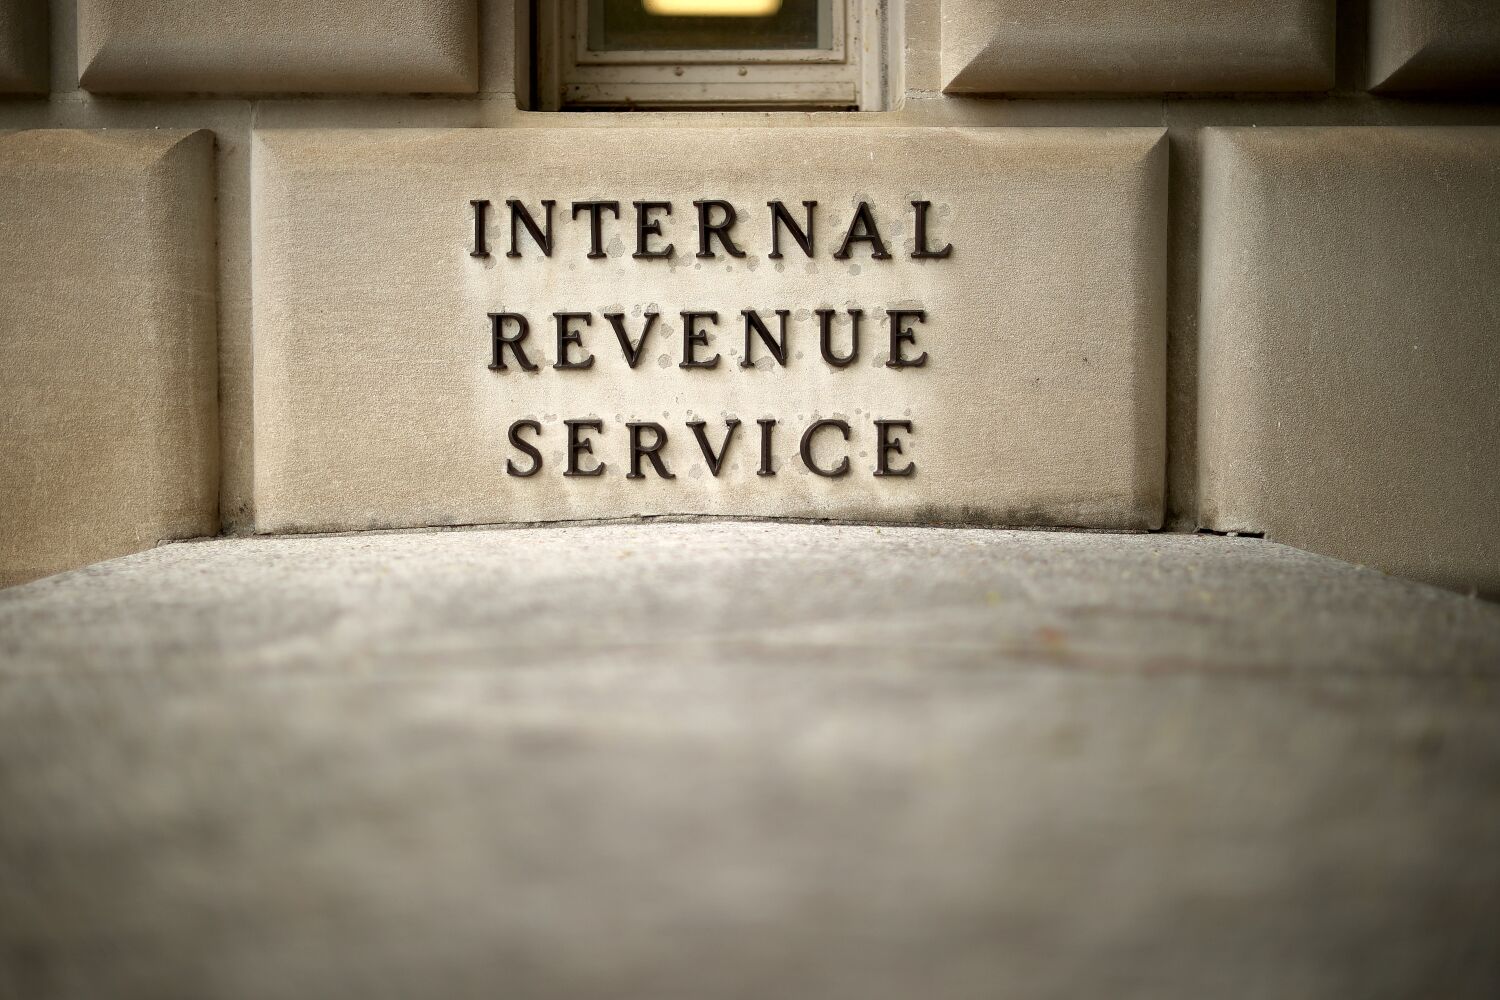 IRS apologizes for telling taxpayers their debt was due in weeks rather than months